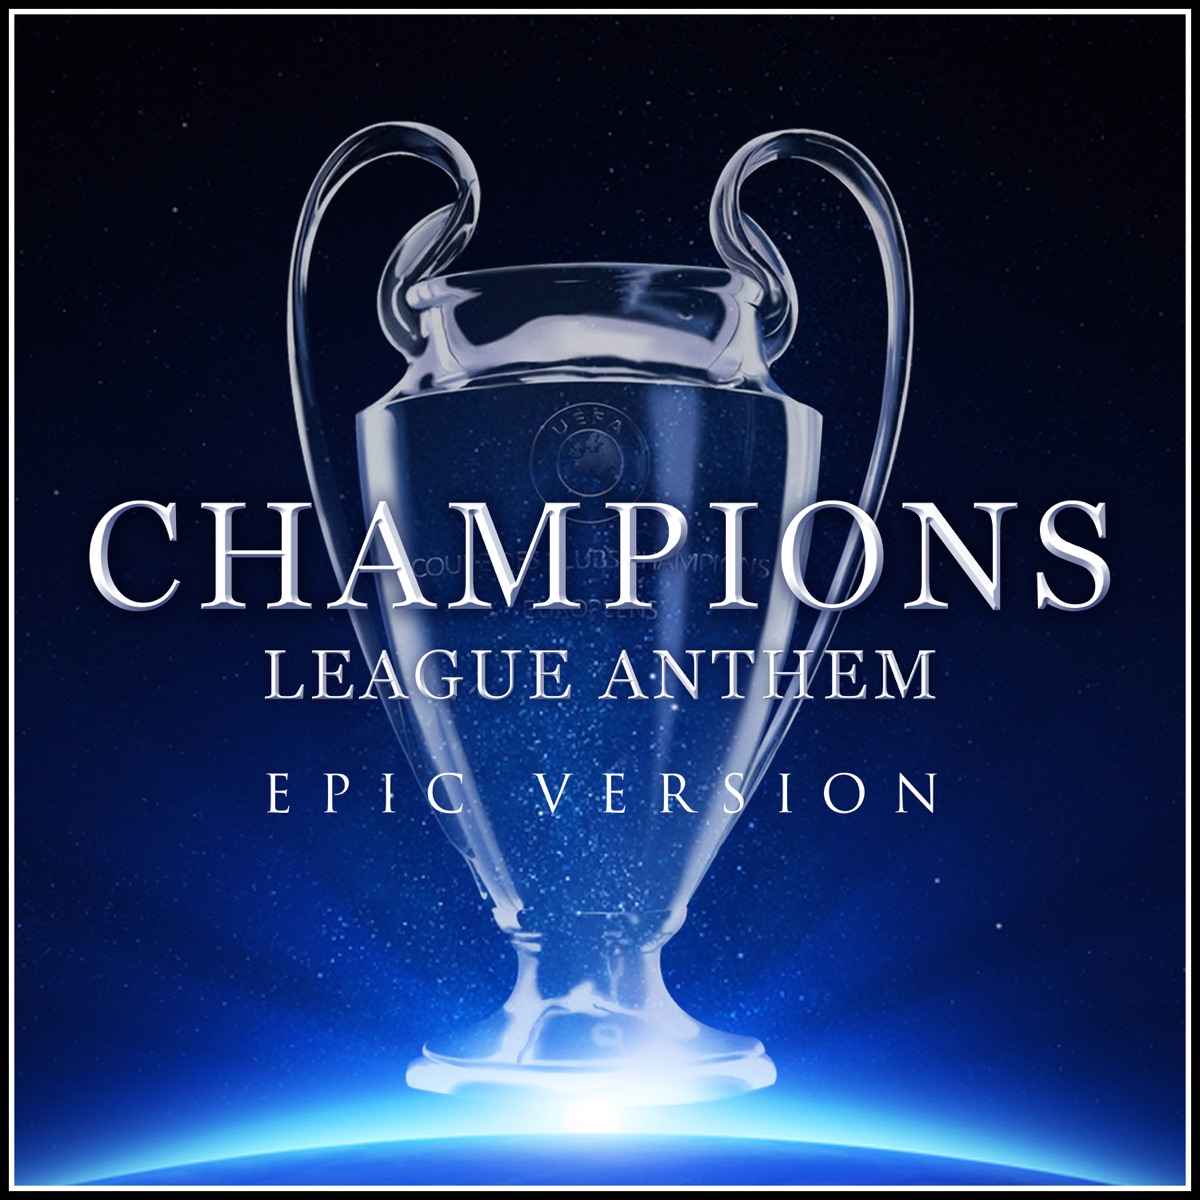 Champions League Theme by Champions League Orchestra on Apple Music